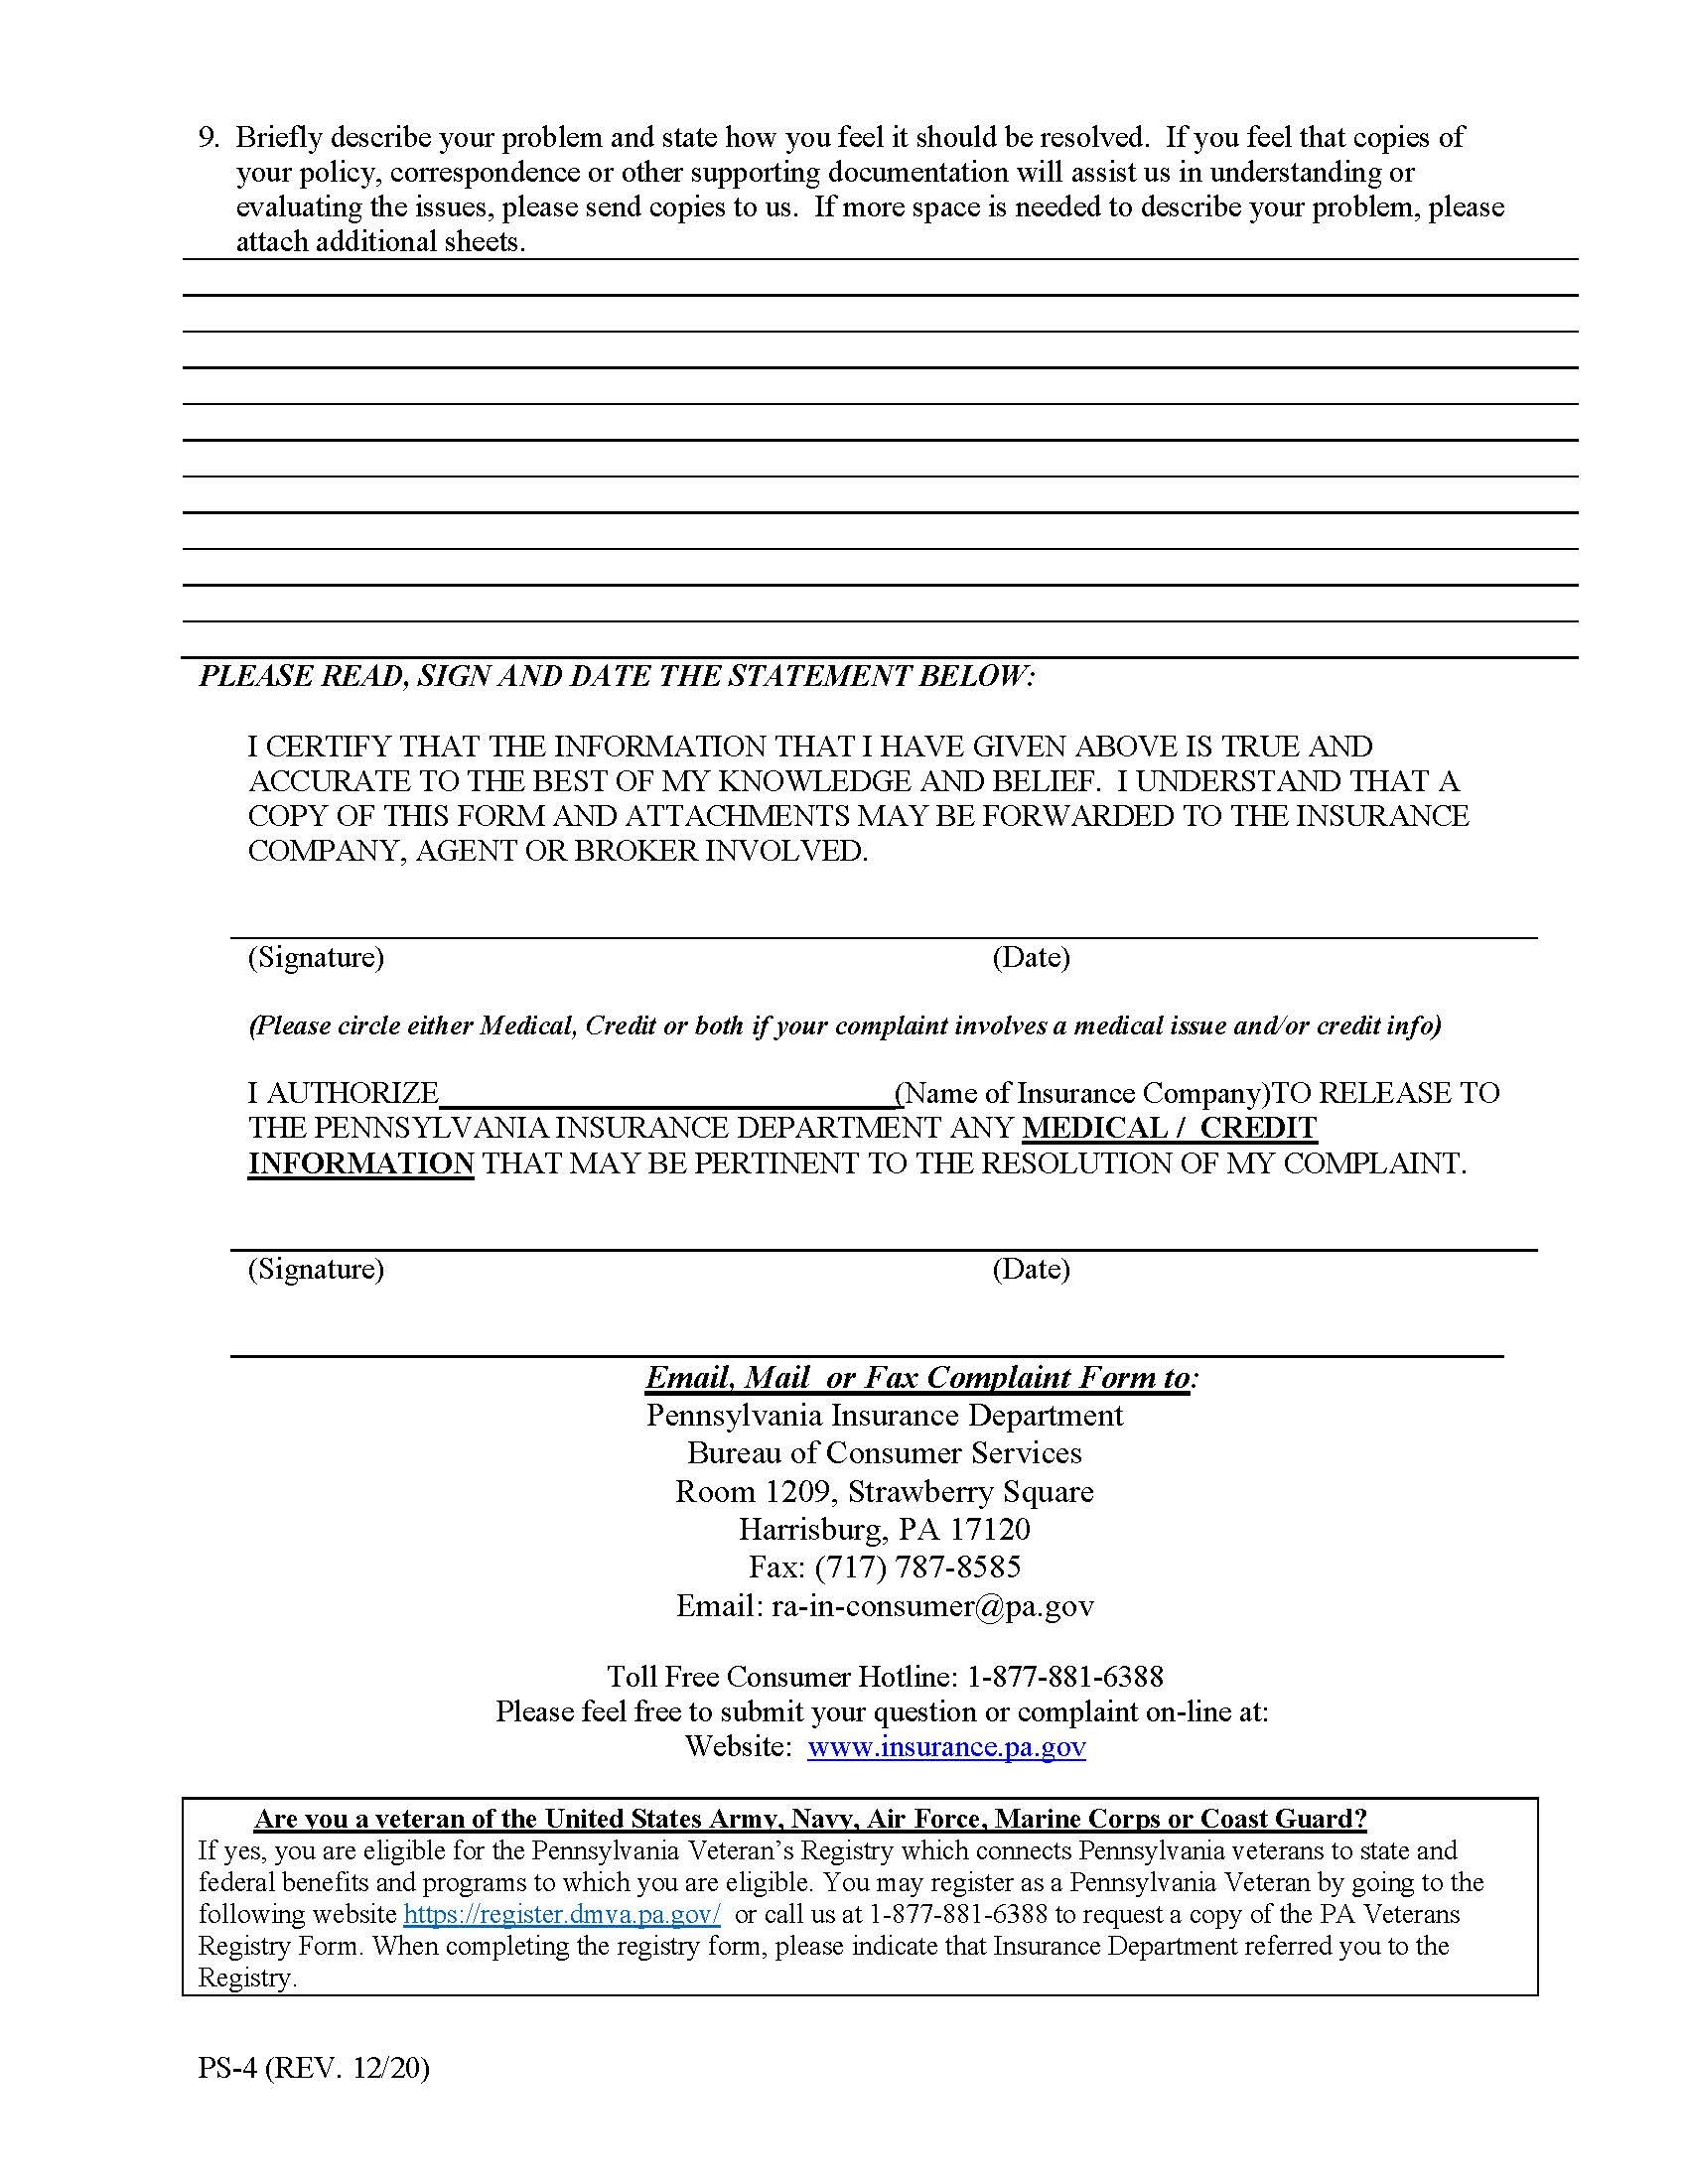 2023-PA Dept of Insurance Complaint Form_Page_2.jpg